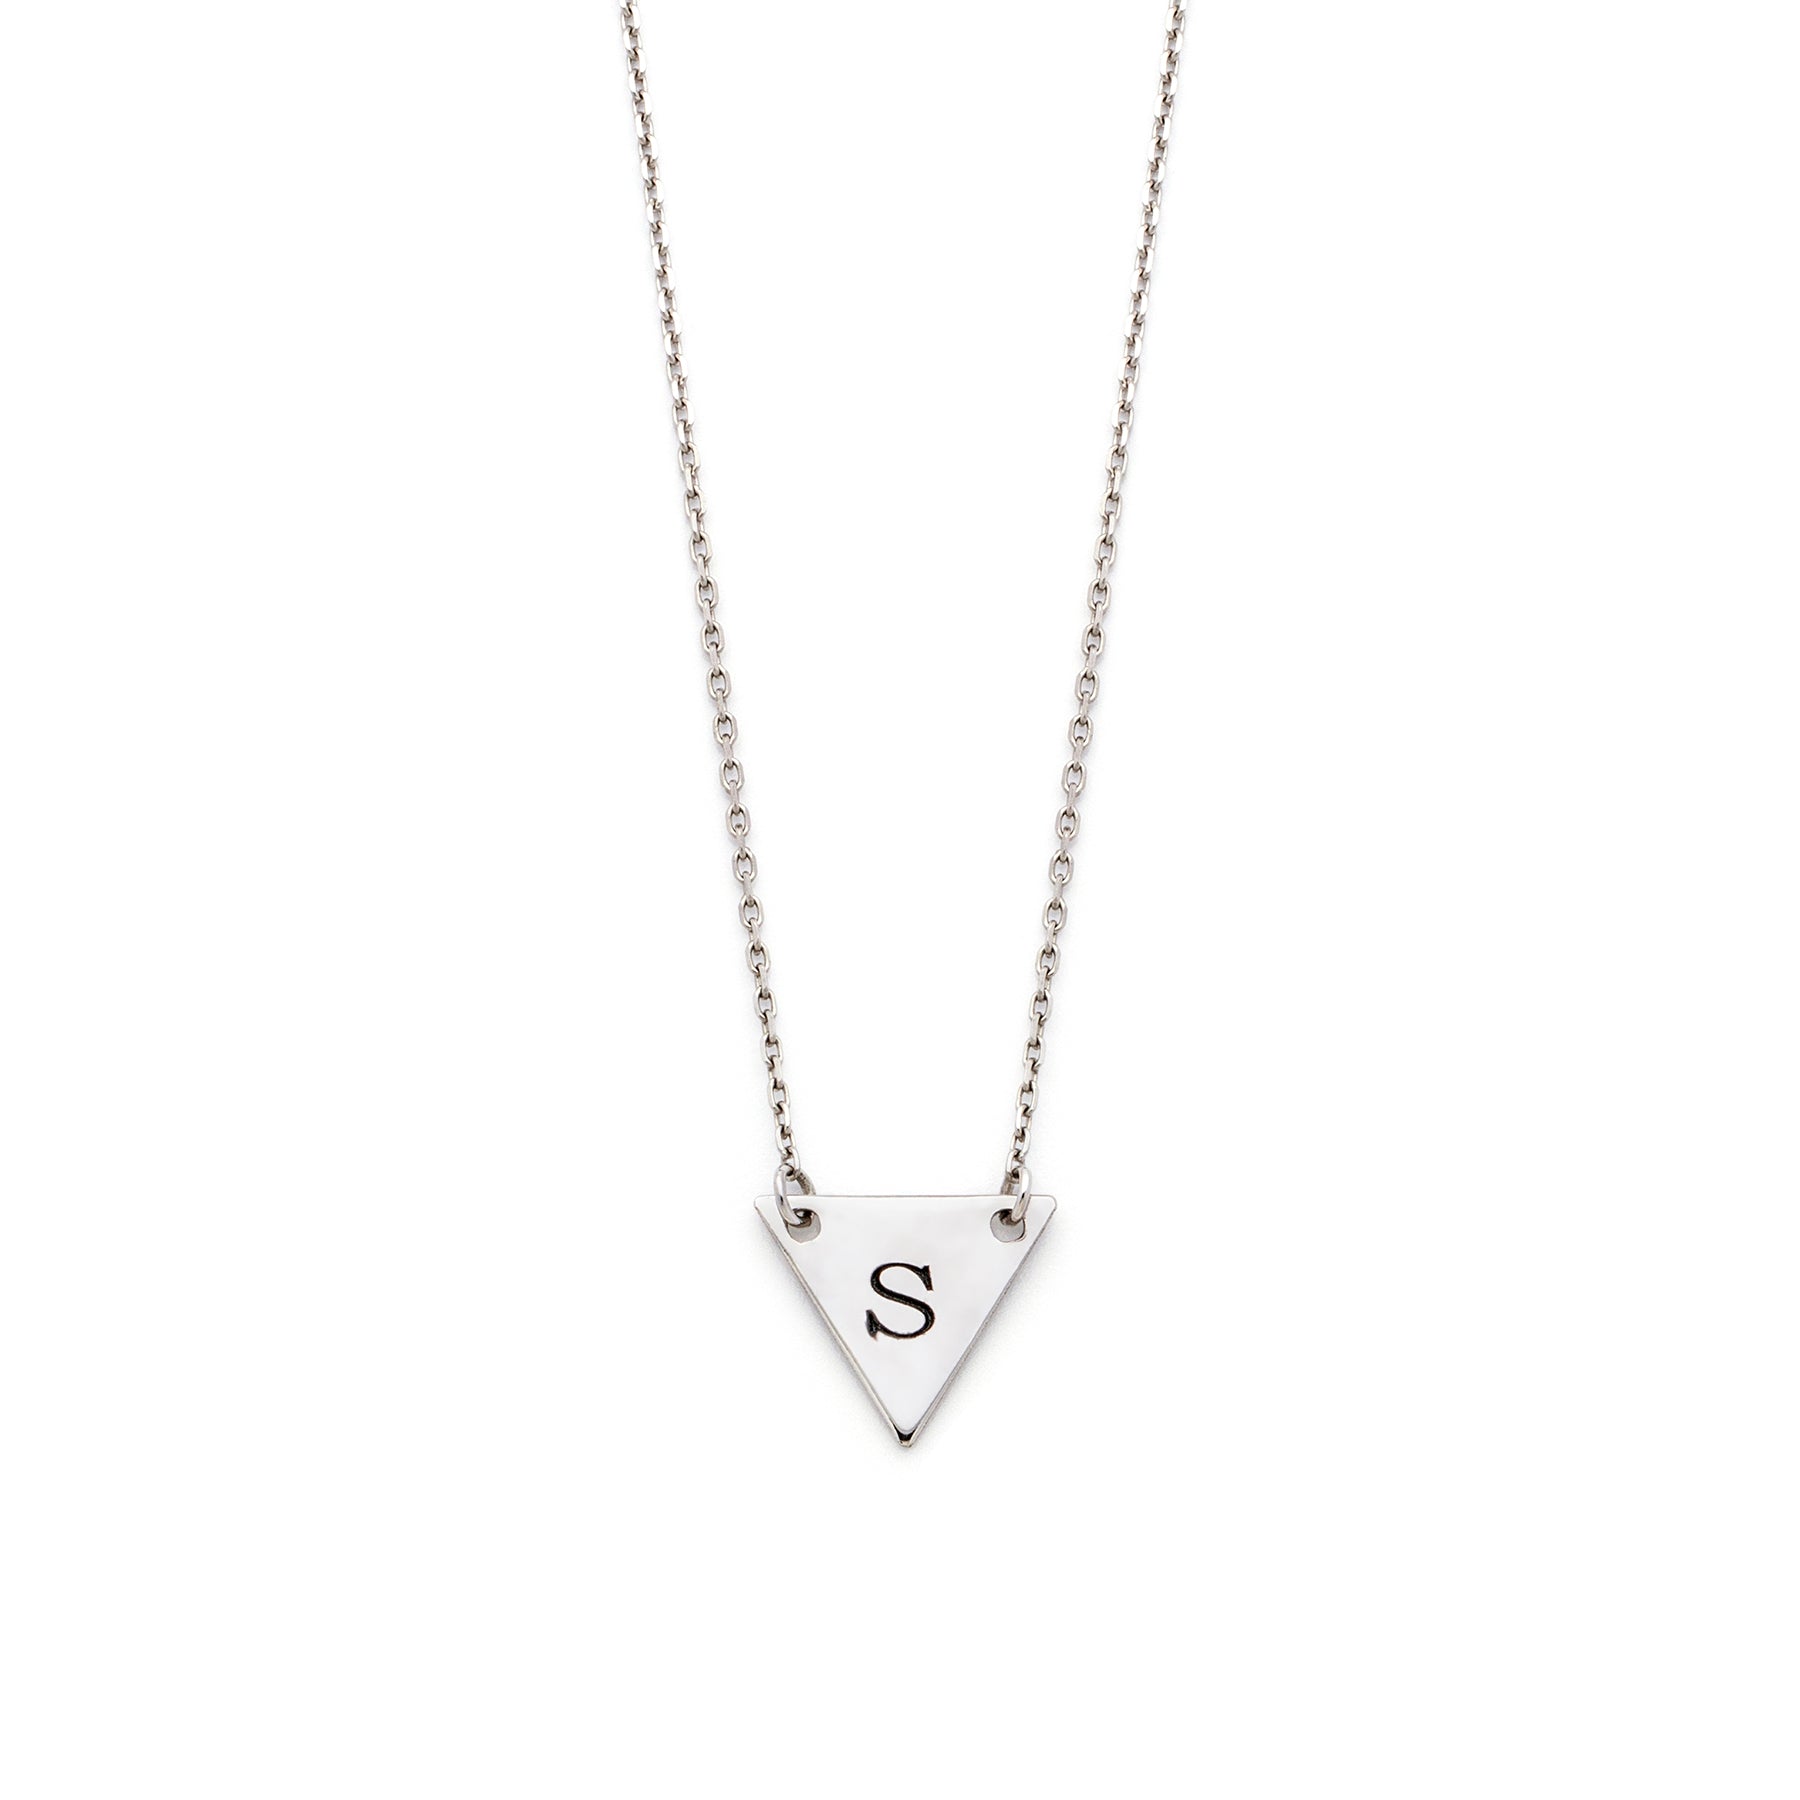 The Chic Initial Pendant